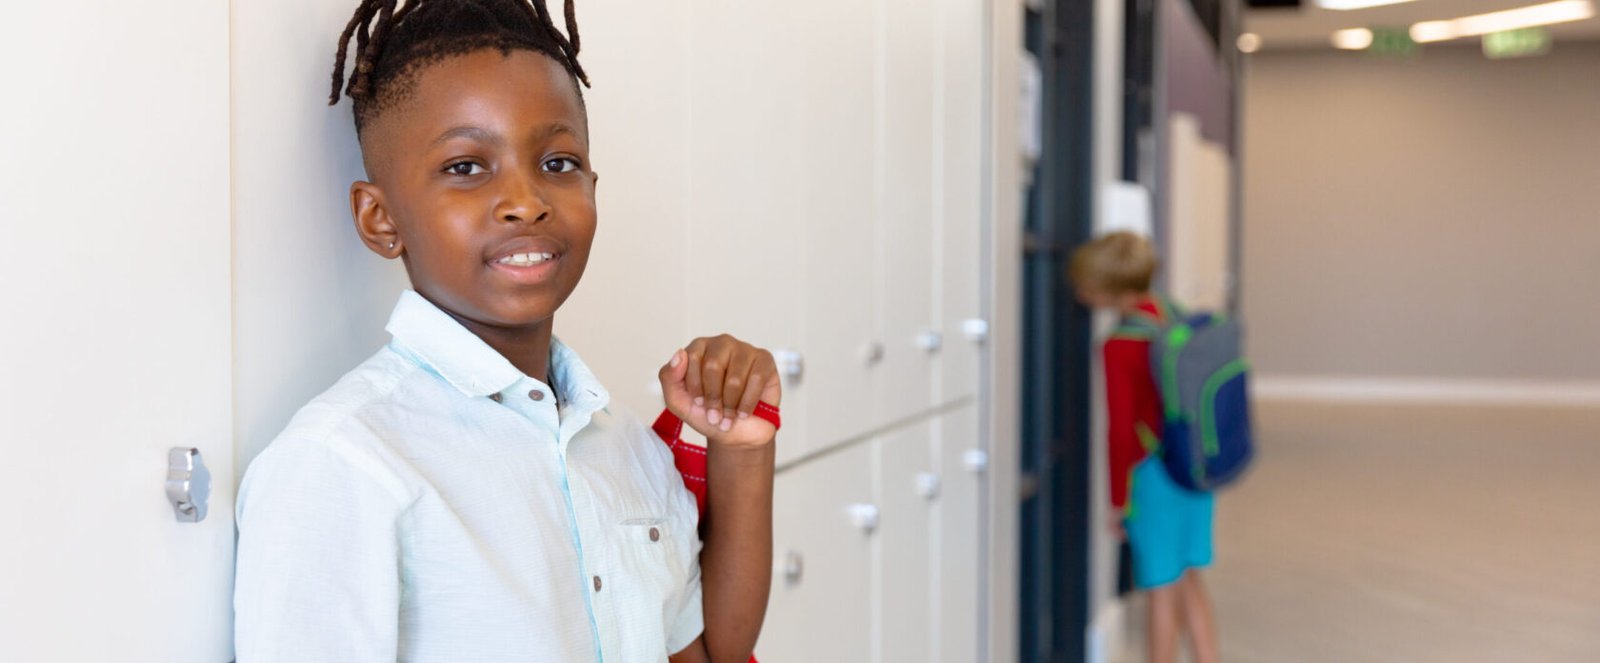 Portrait of smiling african american elementary schoolboy standing by locker in school. unaltered, childhood, education and back to school concept.